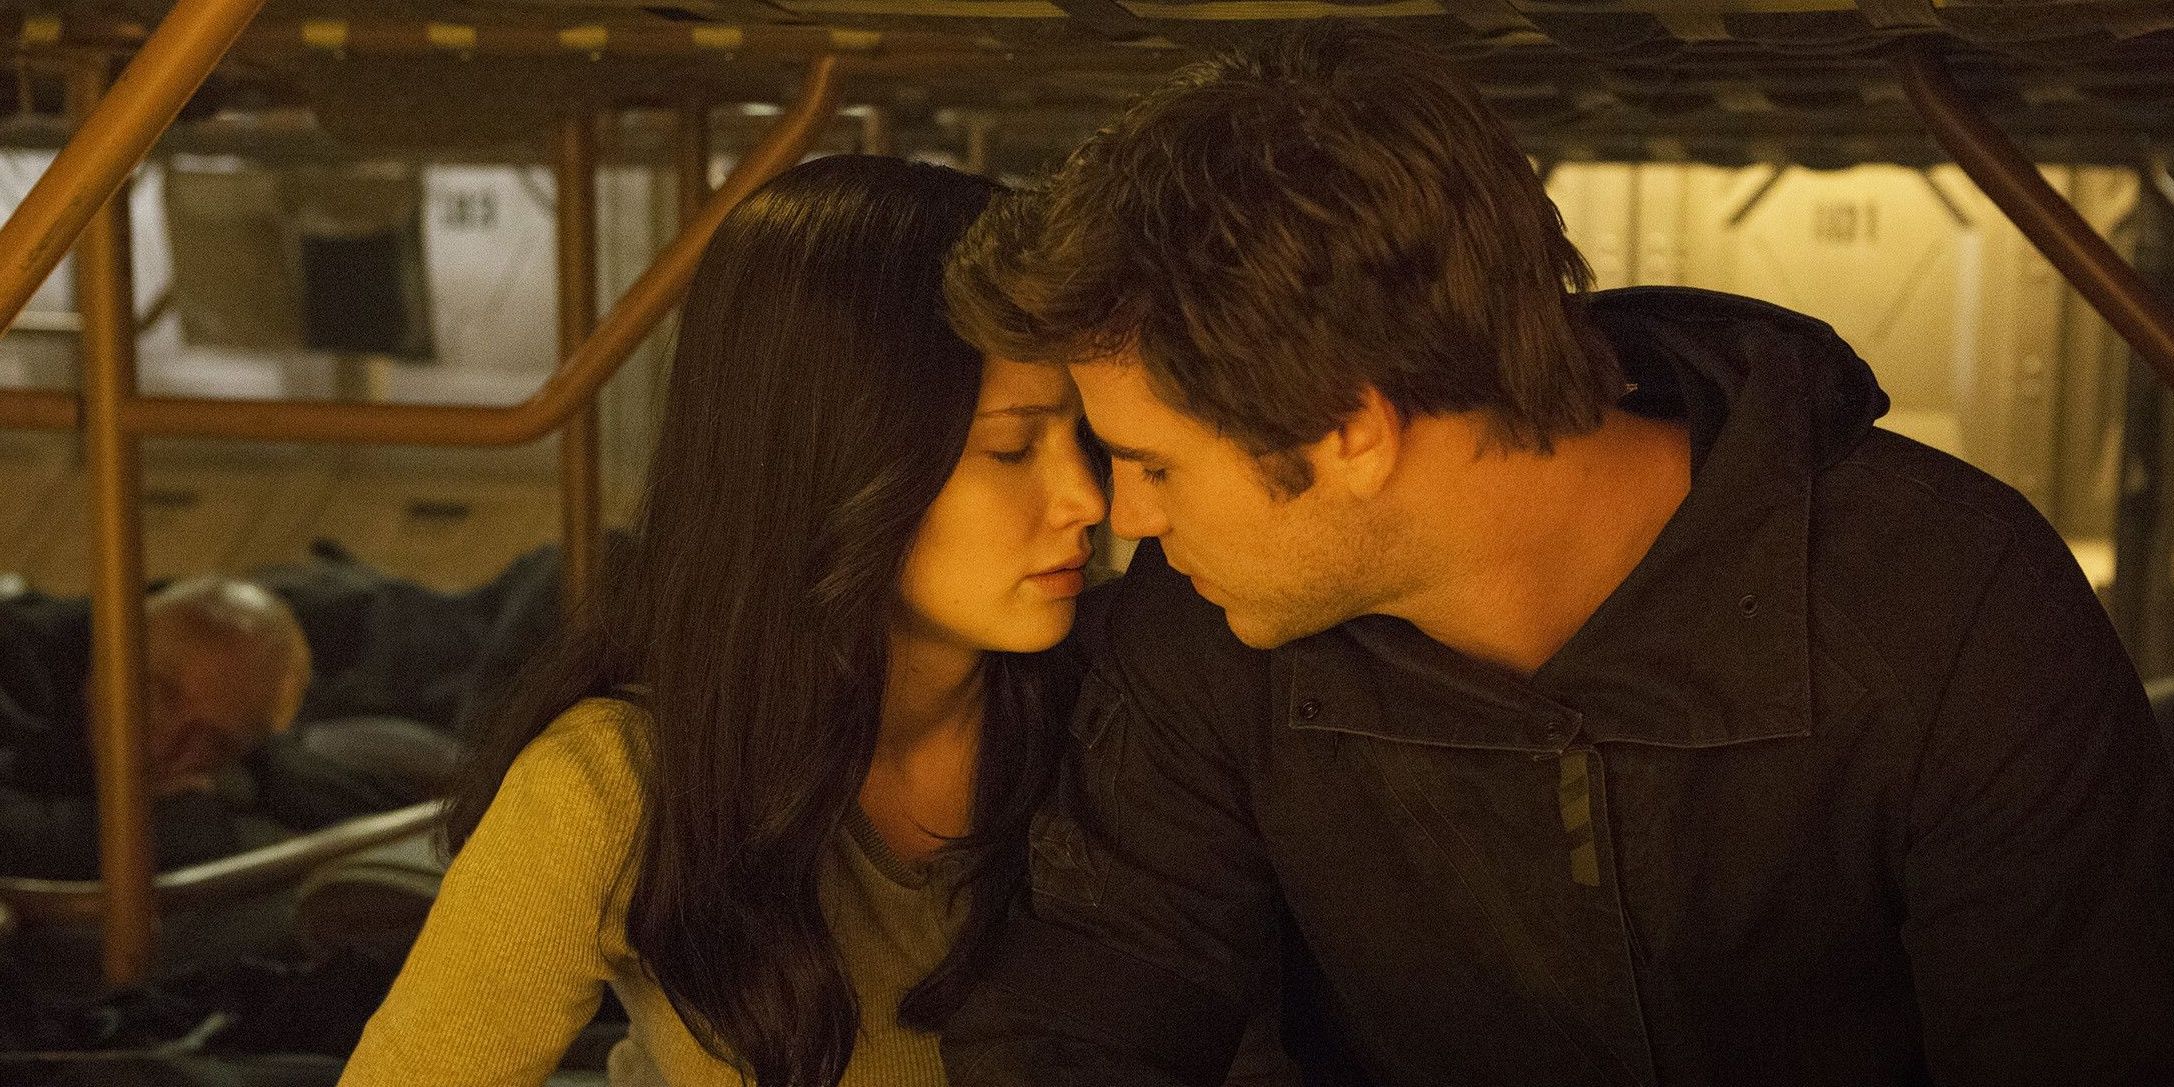 Gale and Katniss about to kiss in The Hunger Games